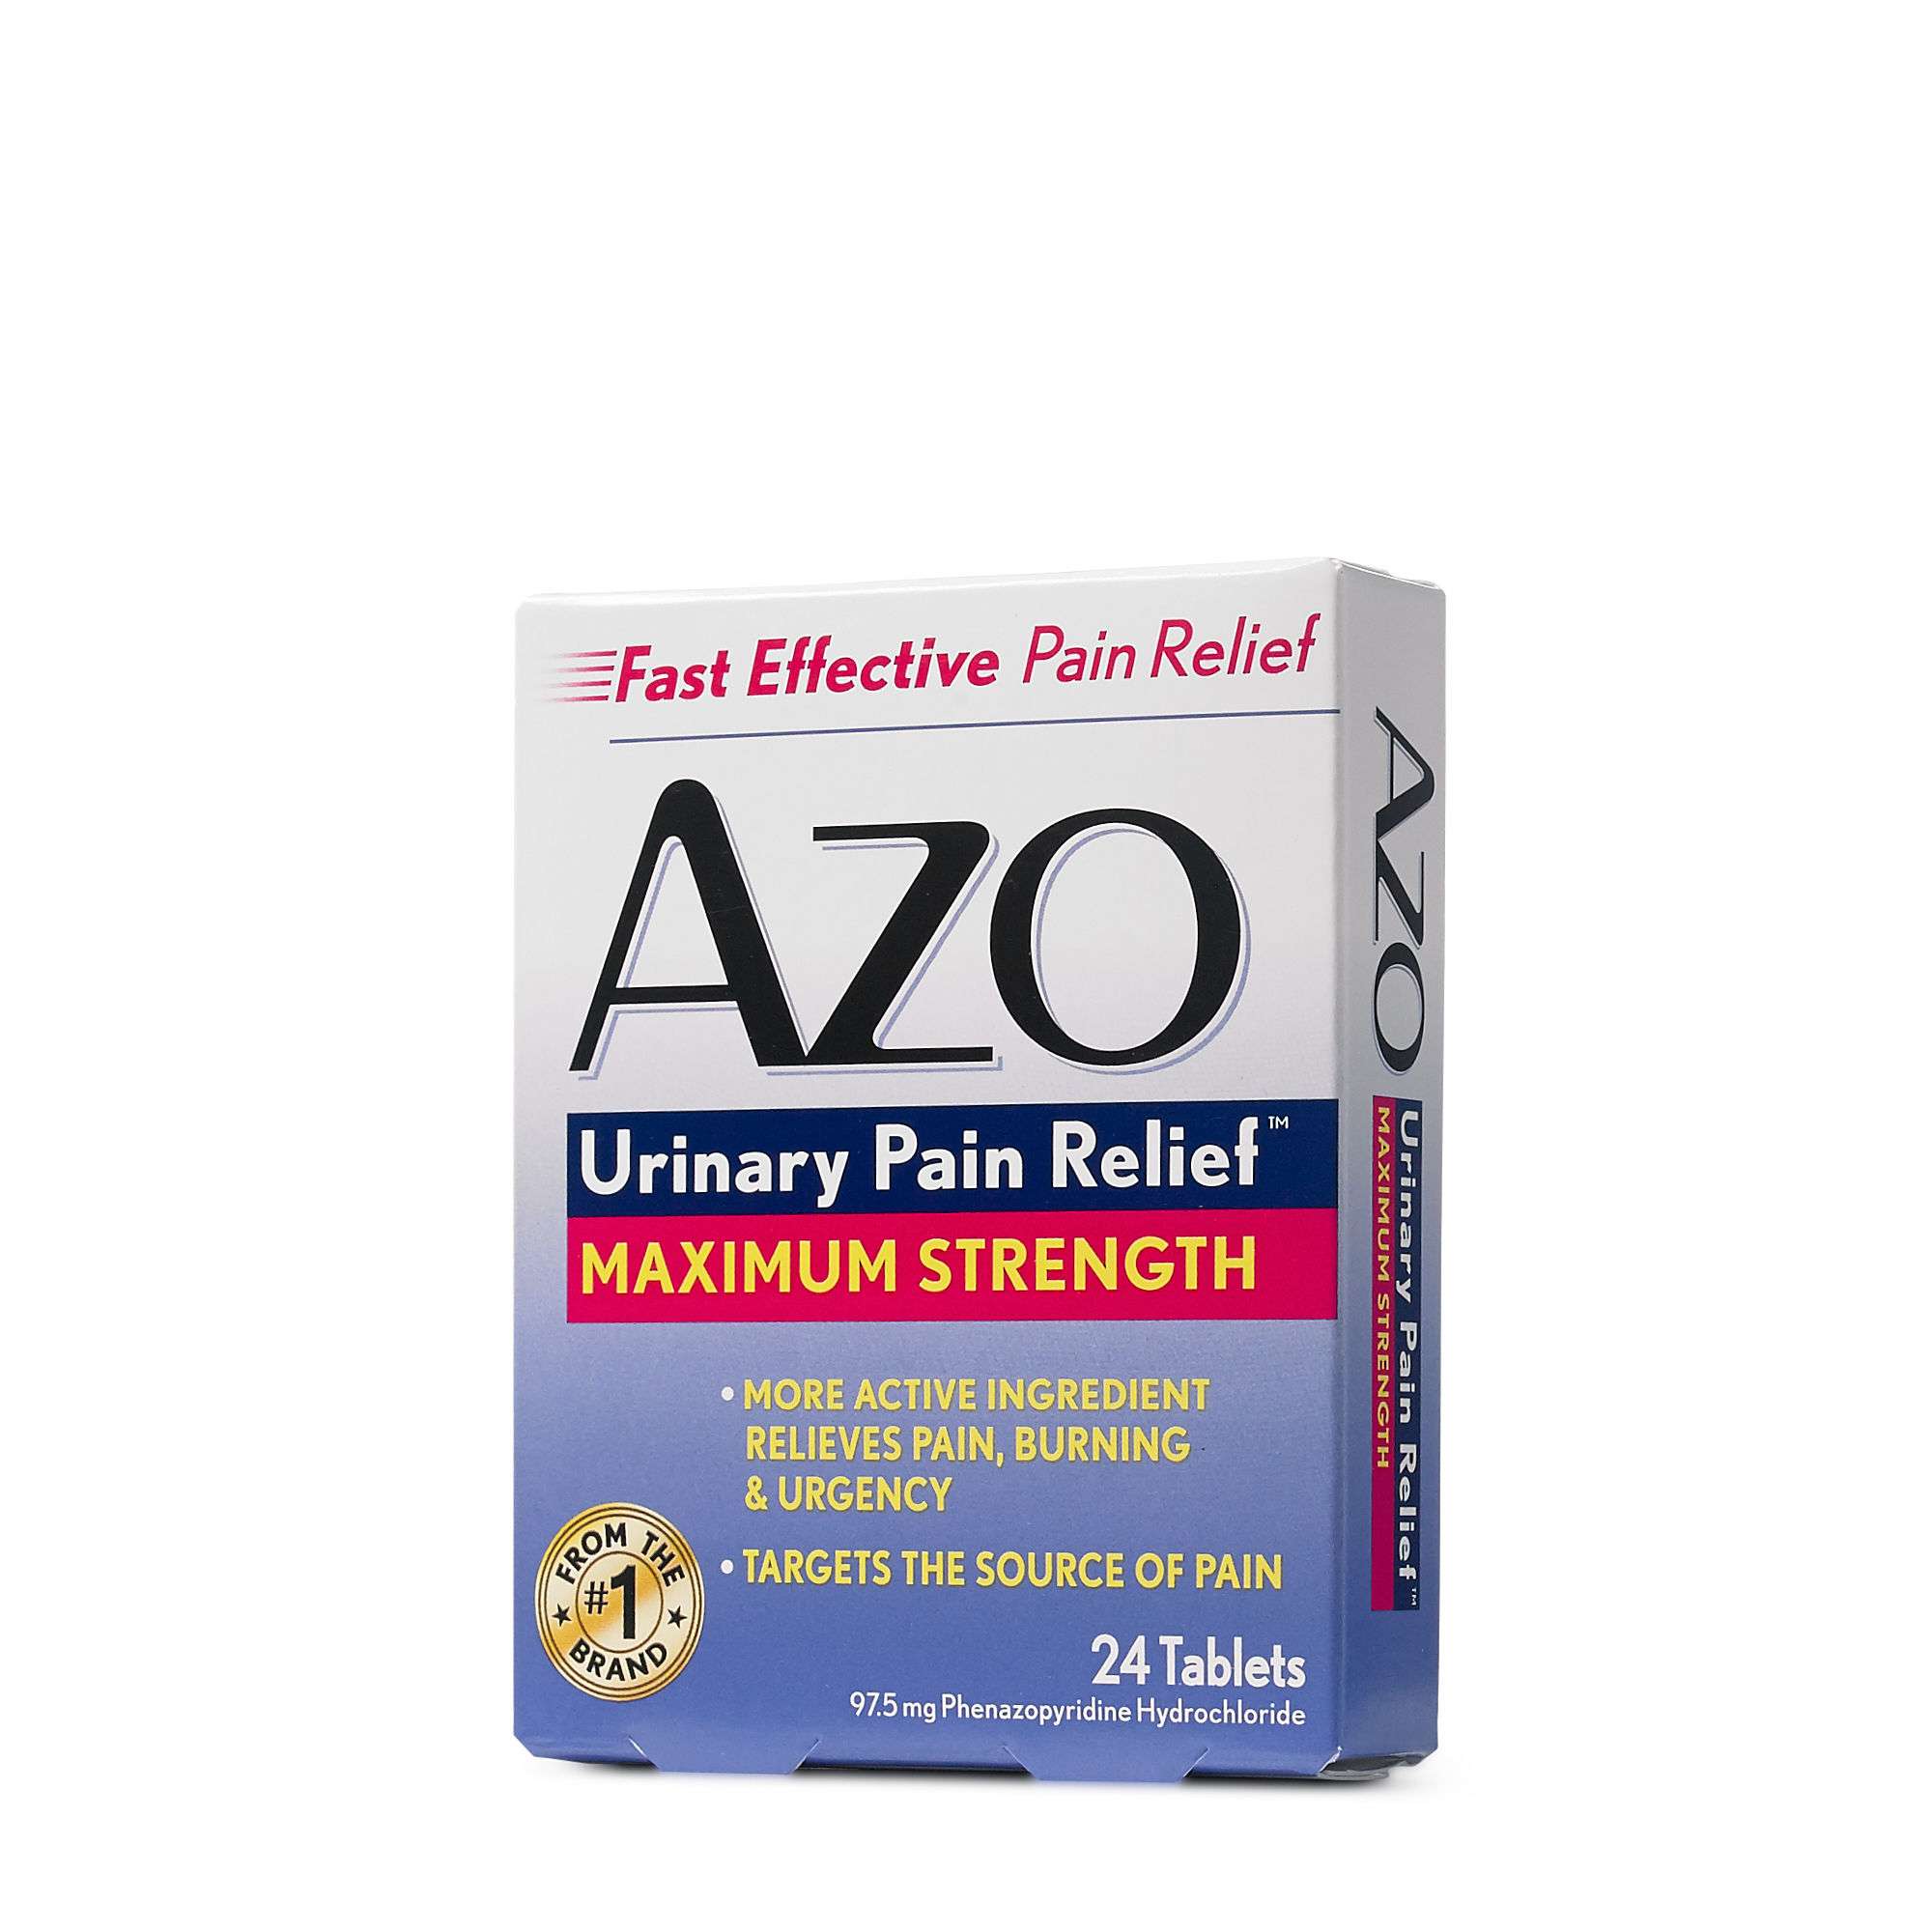 Where To Buy Azo Urinary Pain Relief